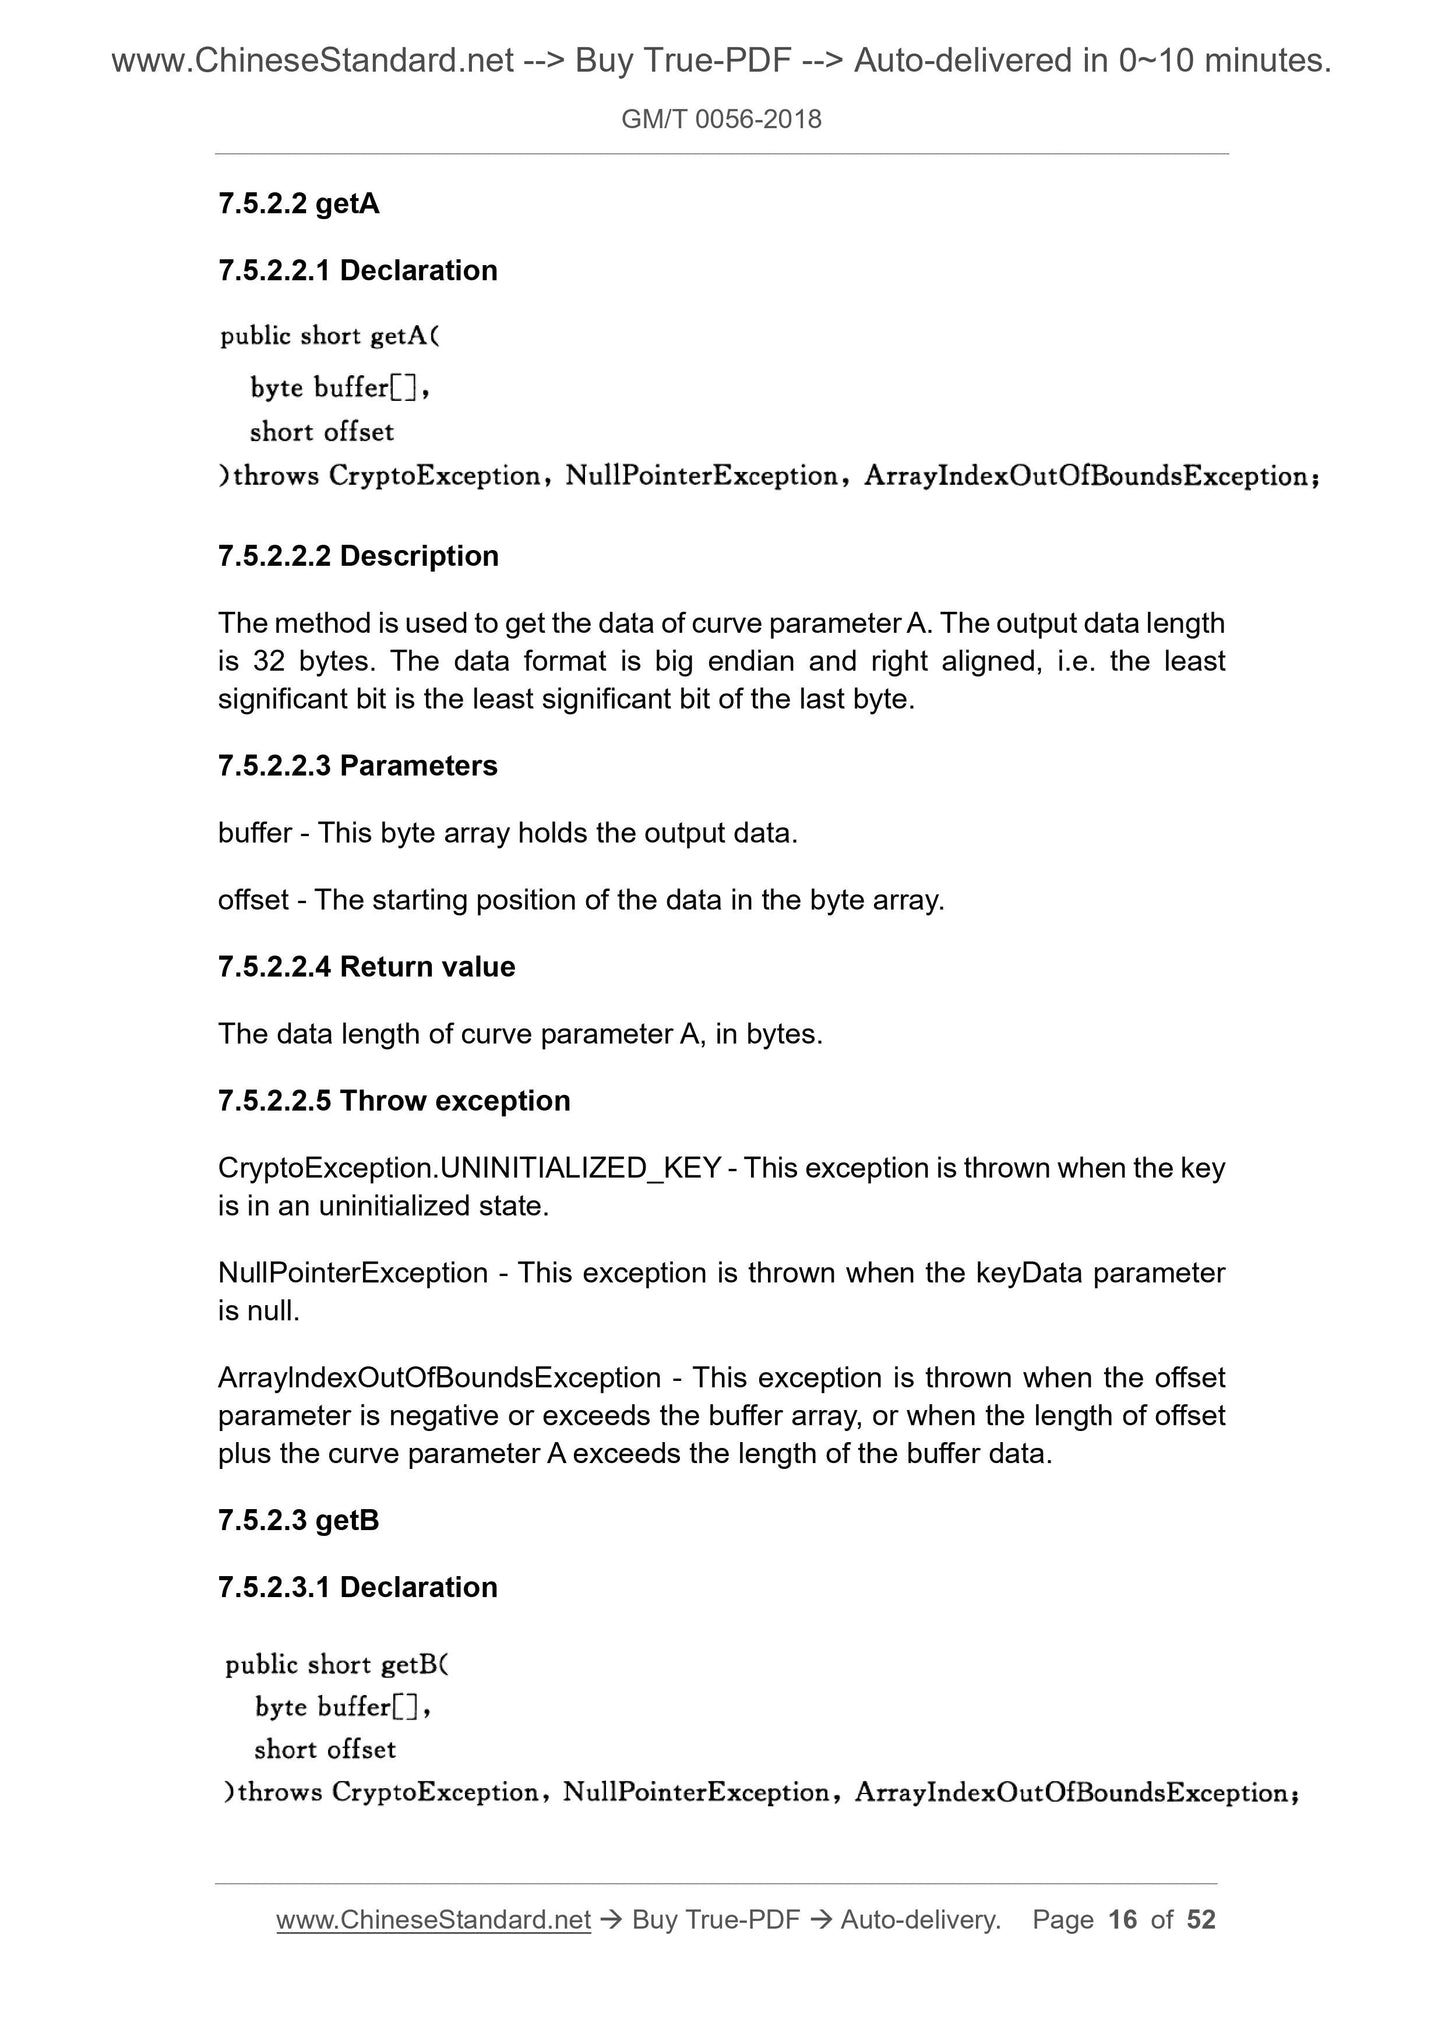 GM/T 0056-2018 Page 7